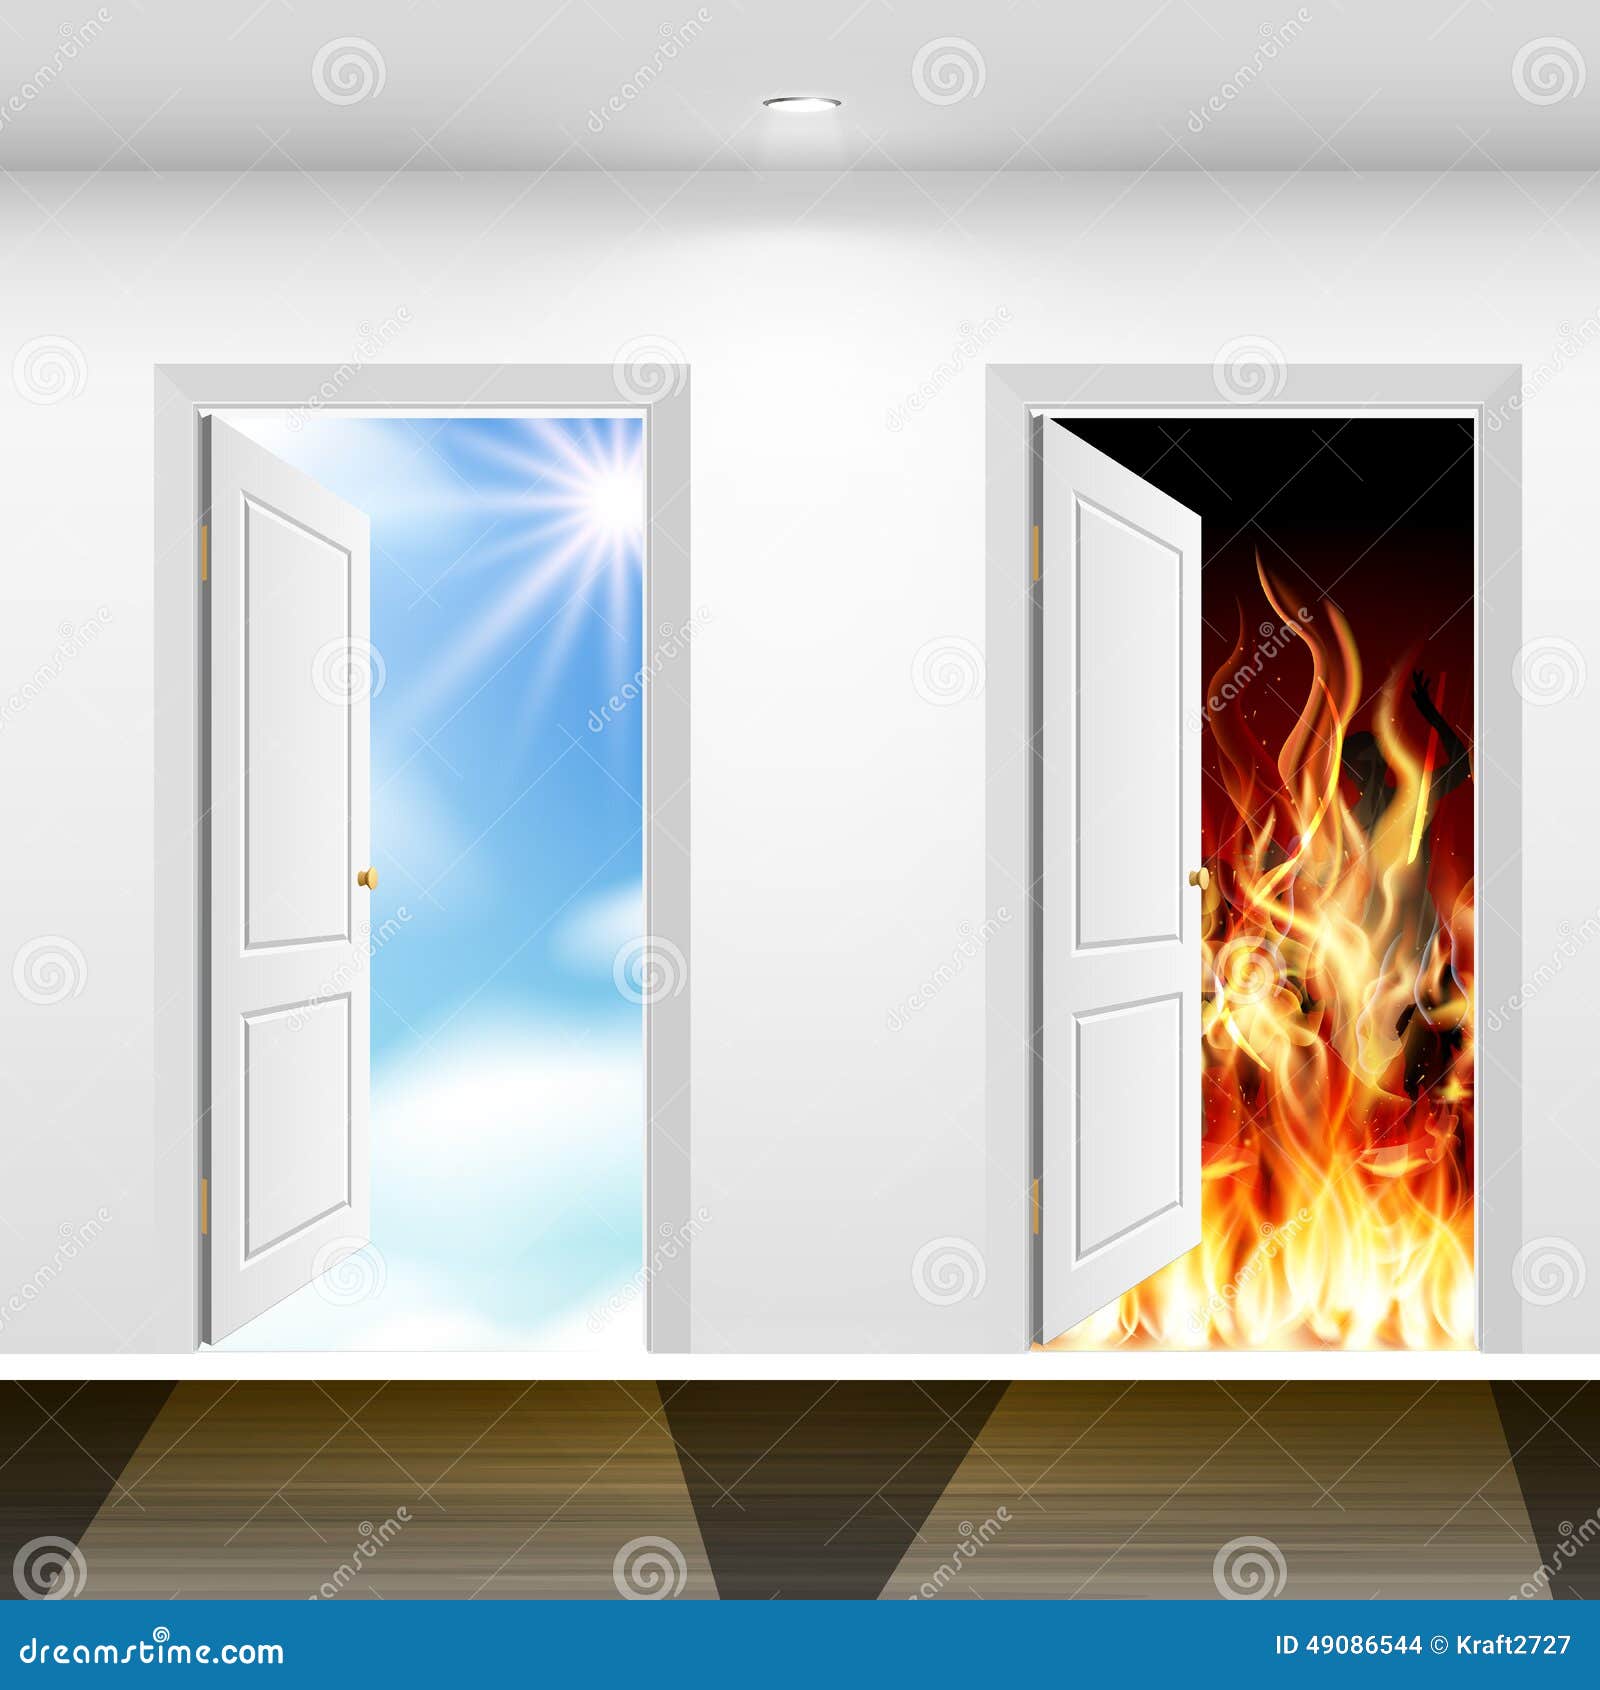 Doors to heaven and hell stock photo. Image of death - 49086544